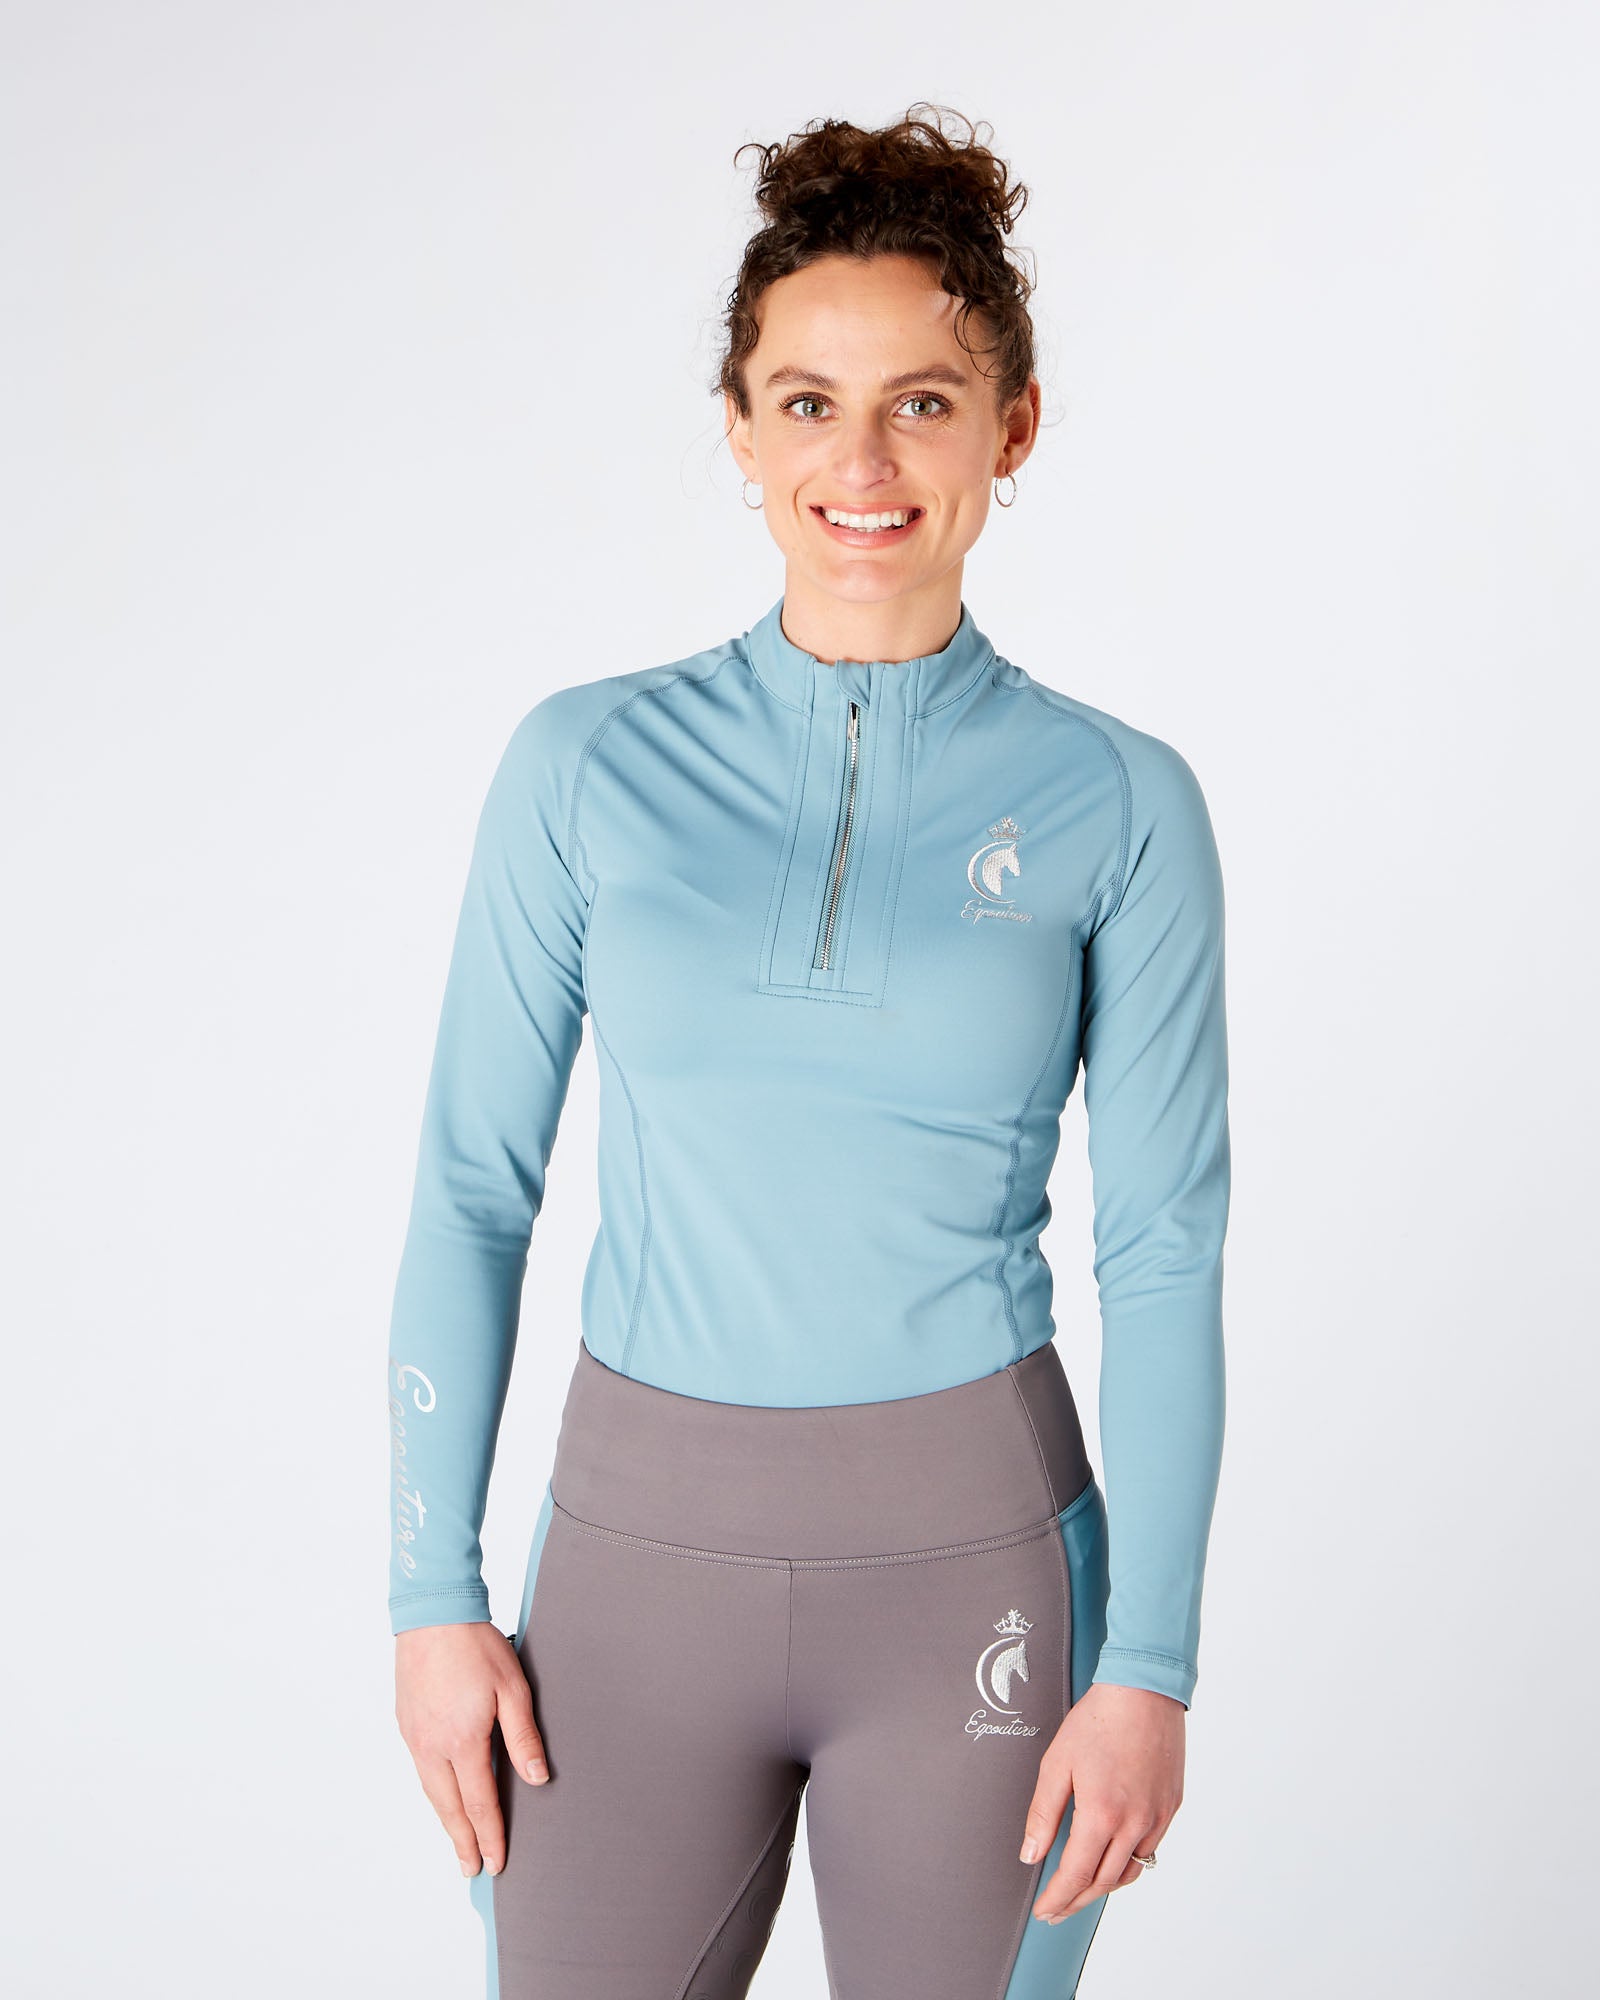 Womens Equestrian long sleeve BLUE riding top / base layer / sports horse riding top- Eqcouture.